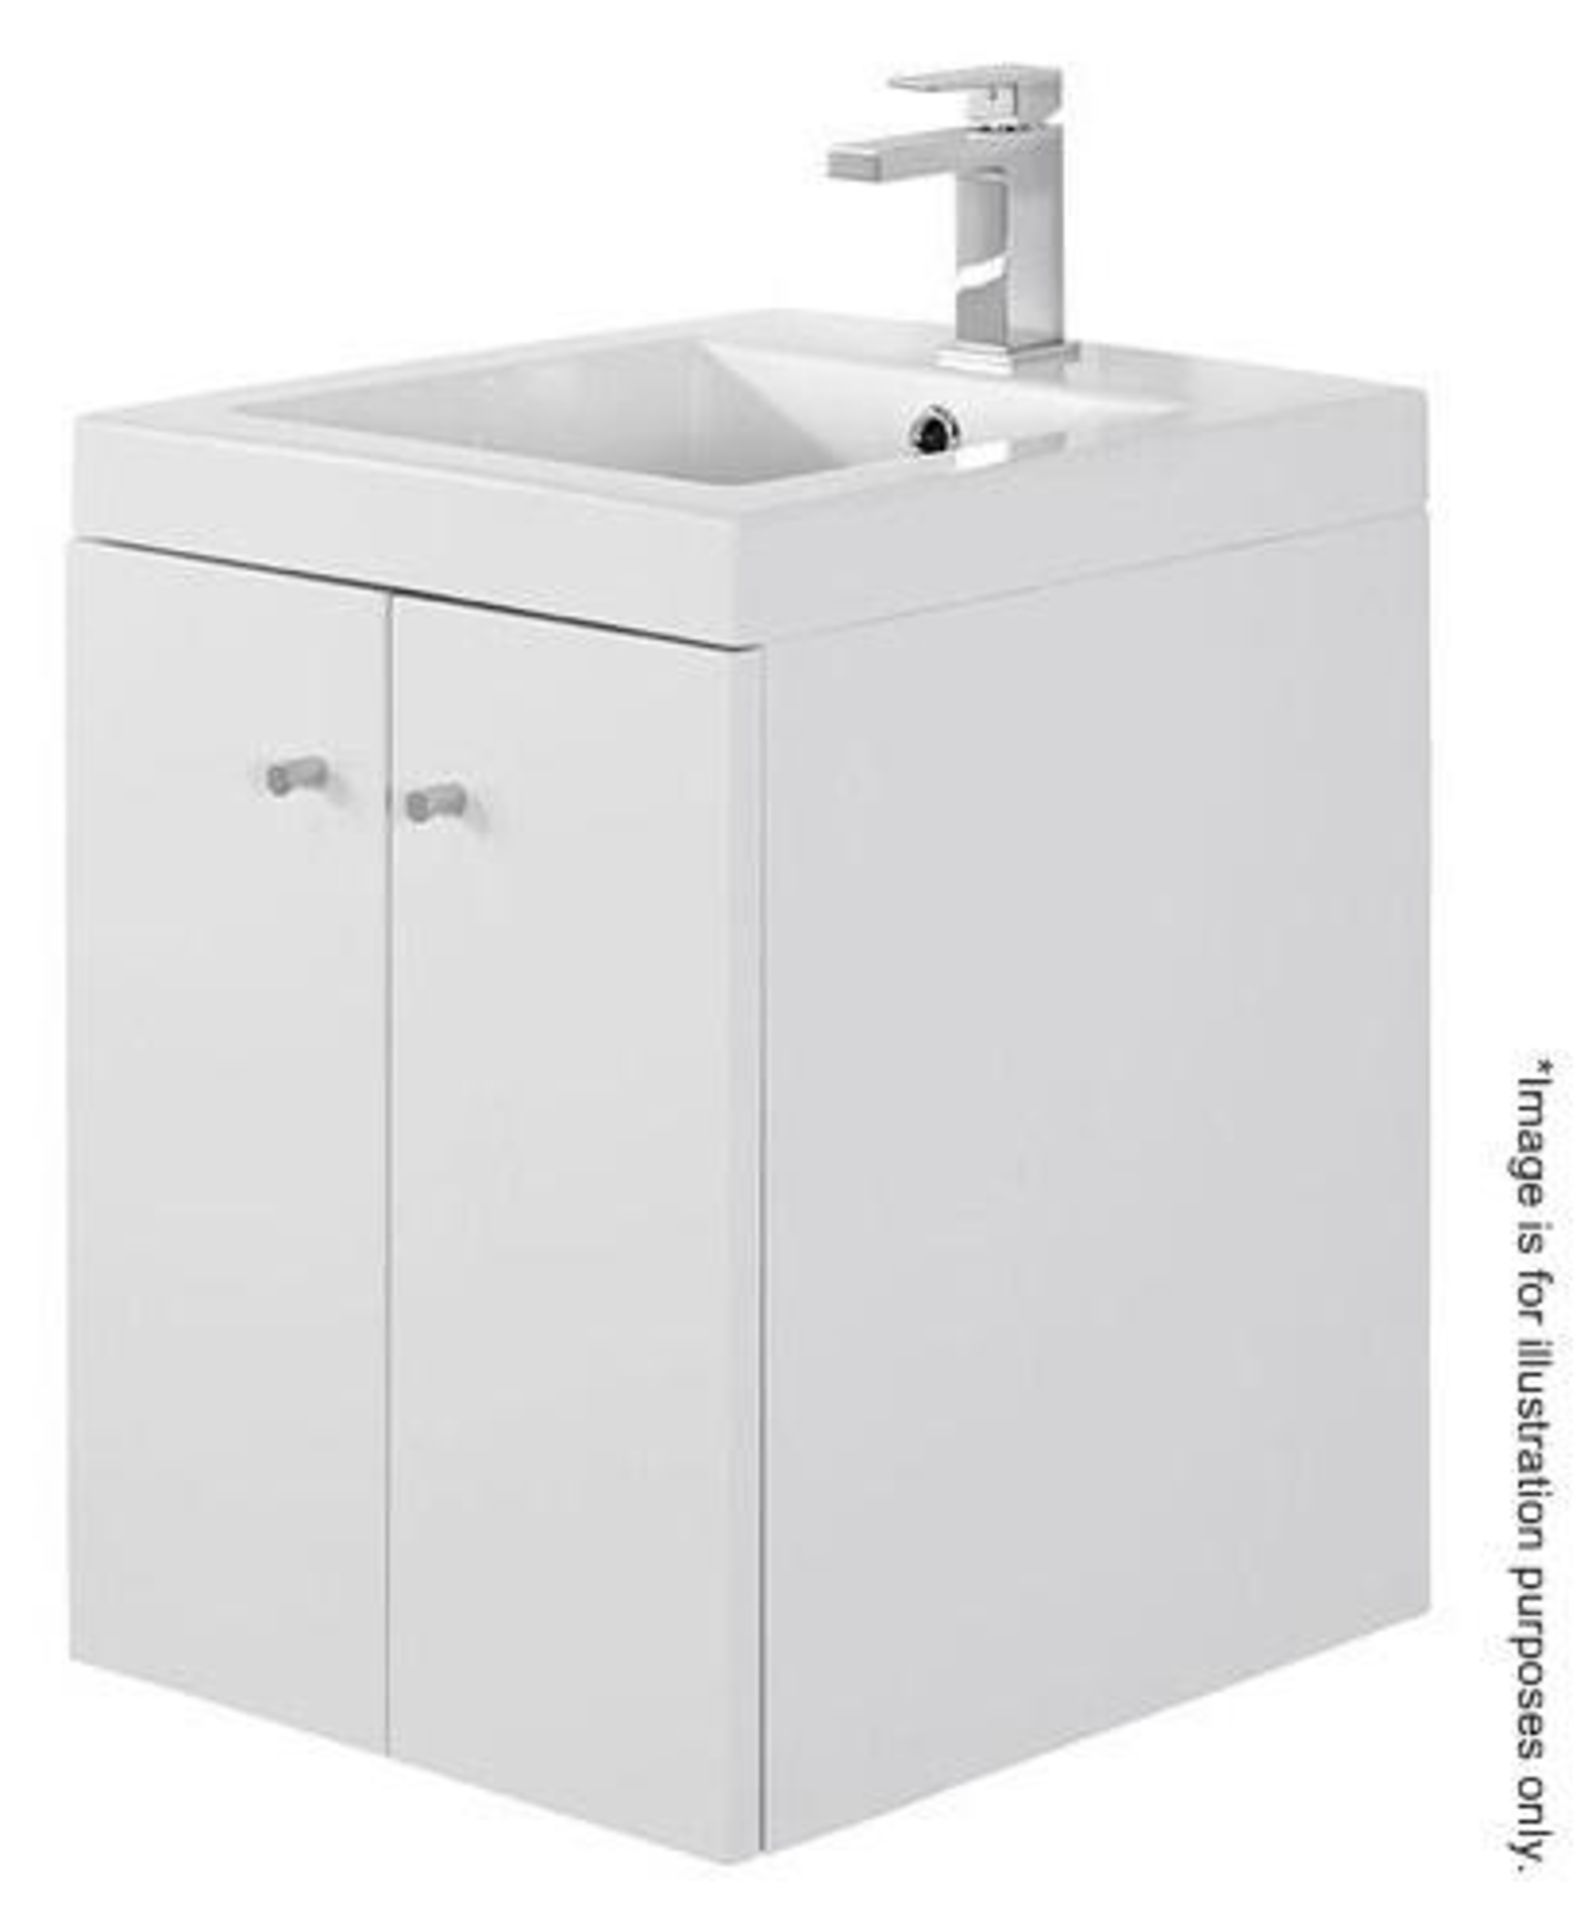 5 x Alpine Duo 400 Wall Hung Vanity Units In Gloss White - Brand New Boxed Stock - Dimensions: H49 x - Image 3 of 5